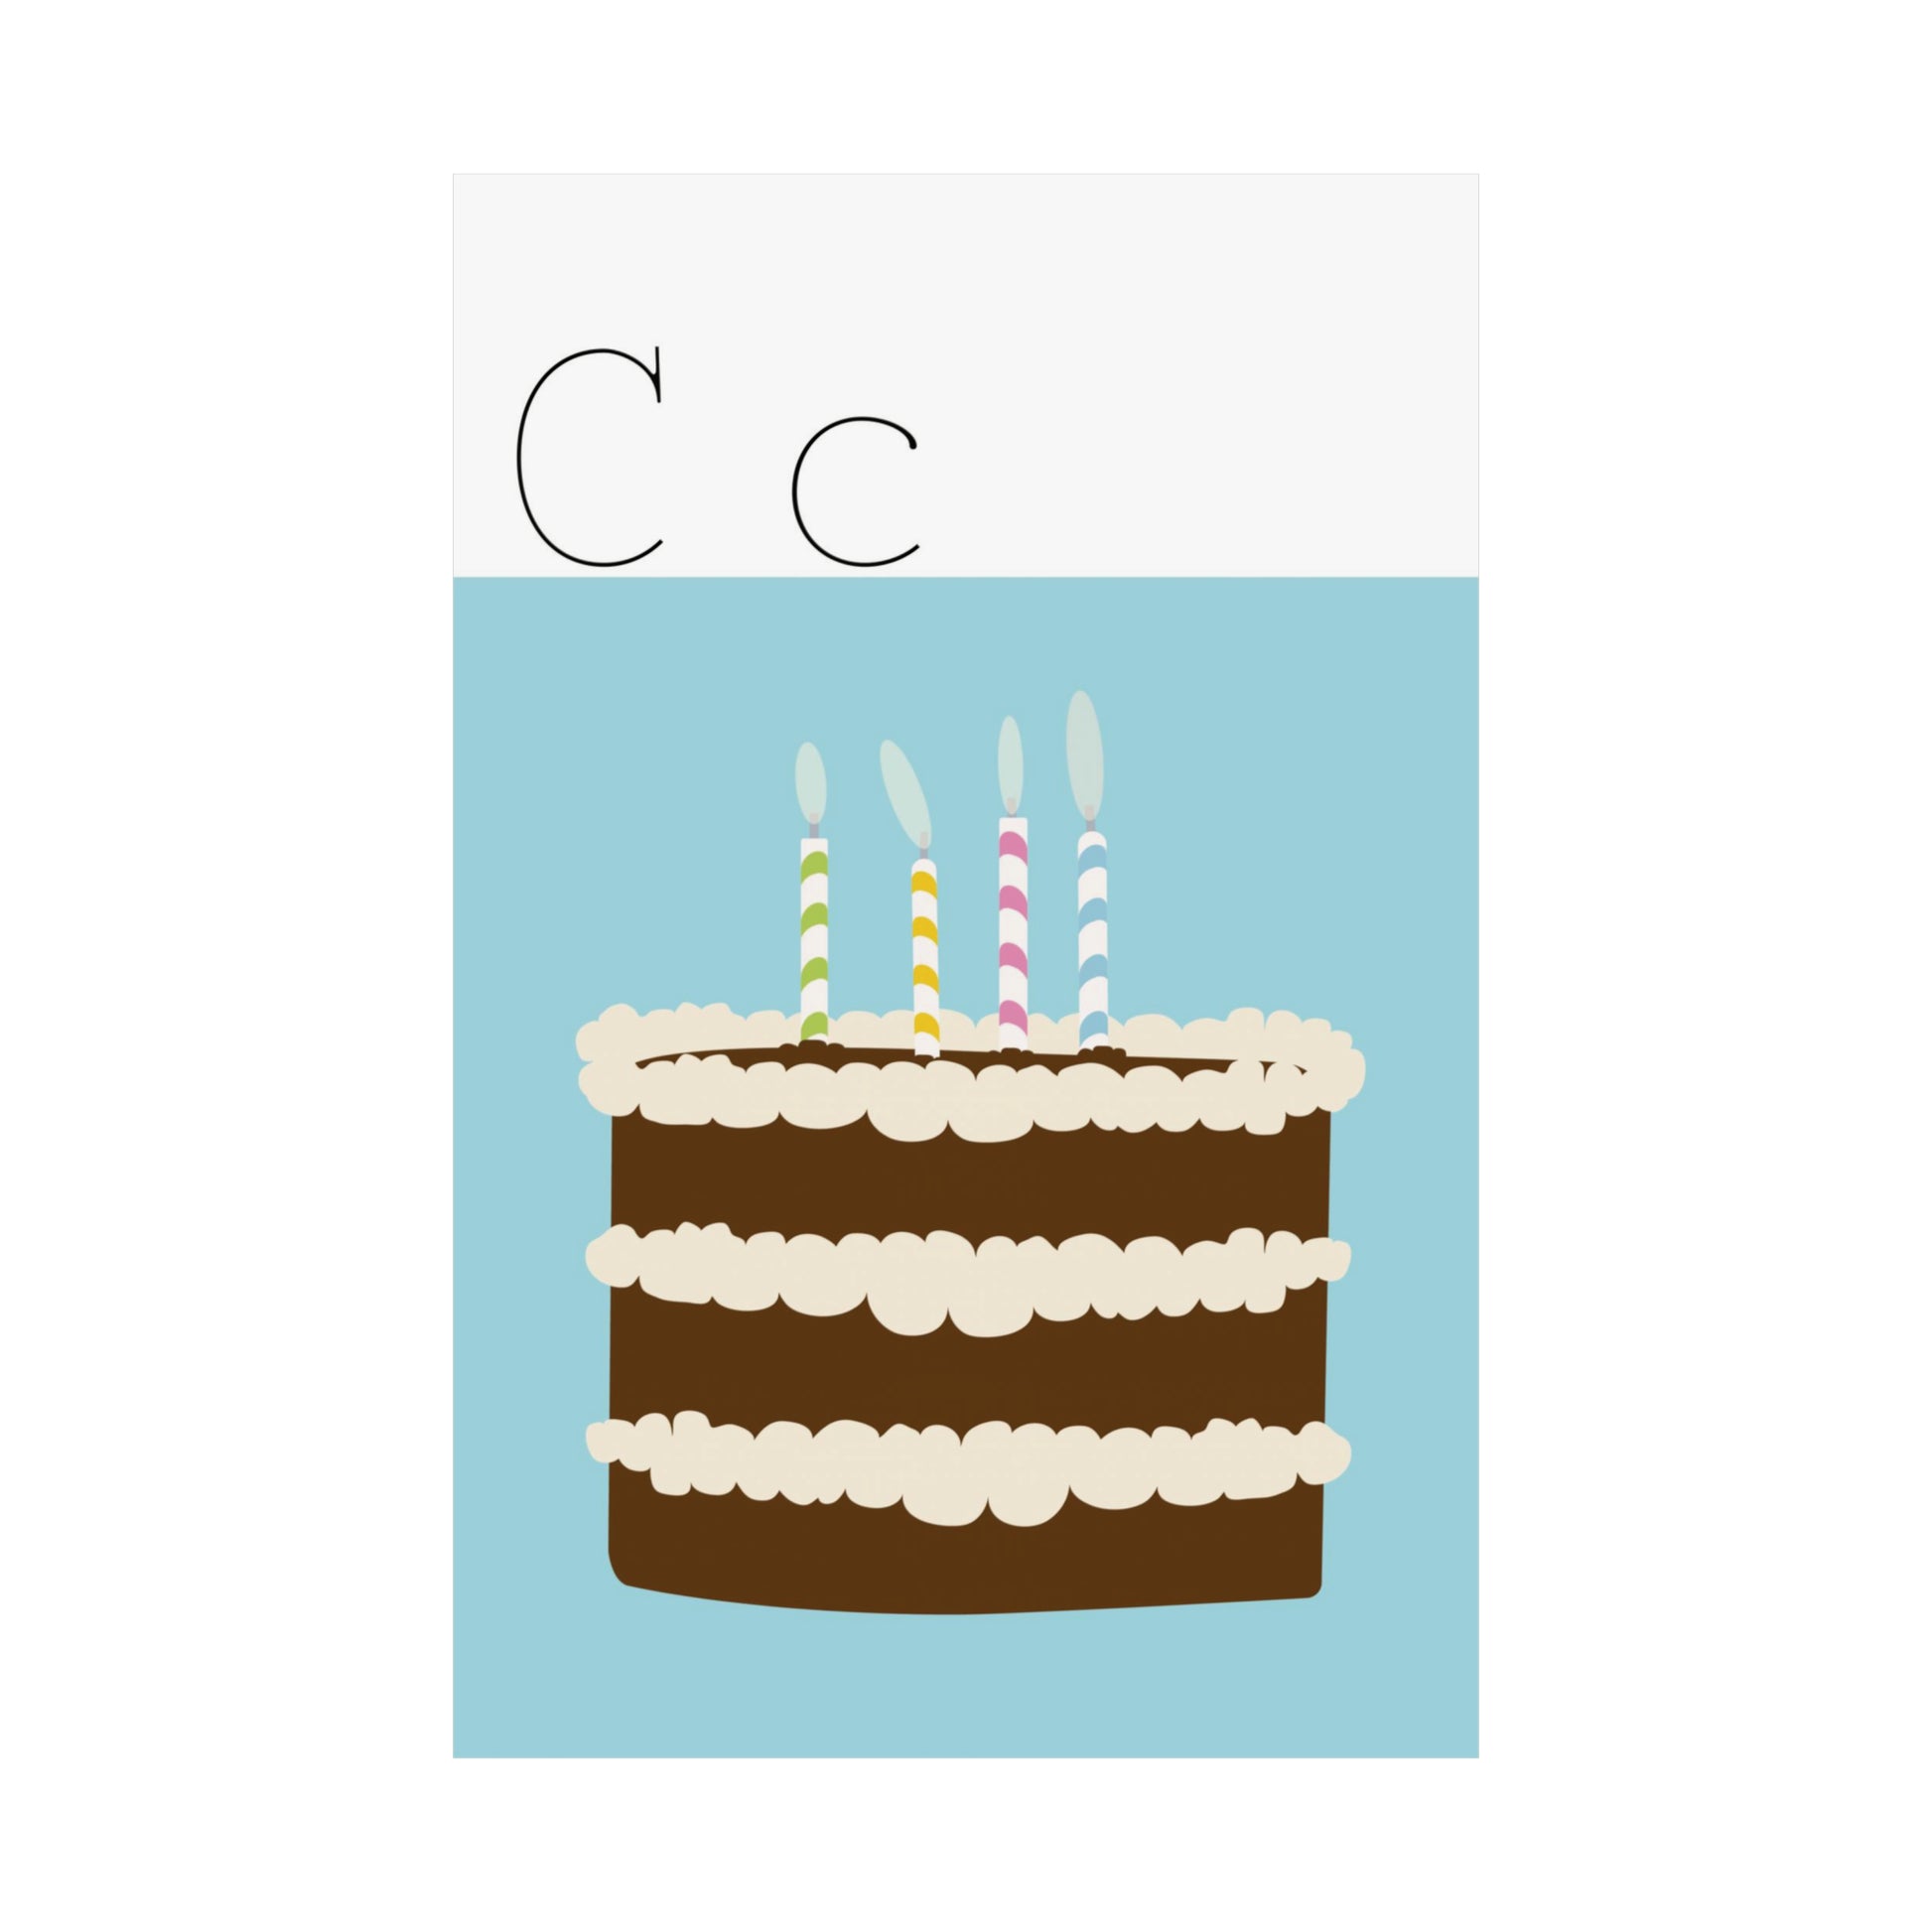 Cake Poster in white background 